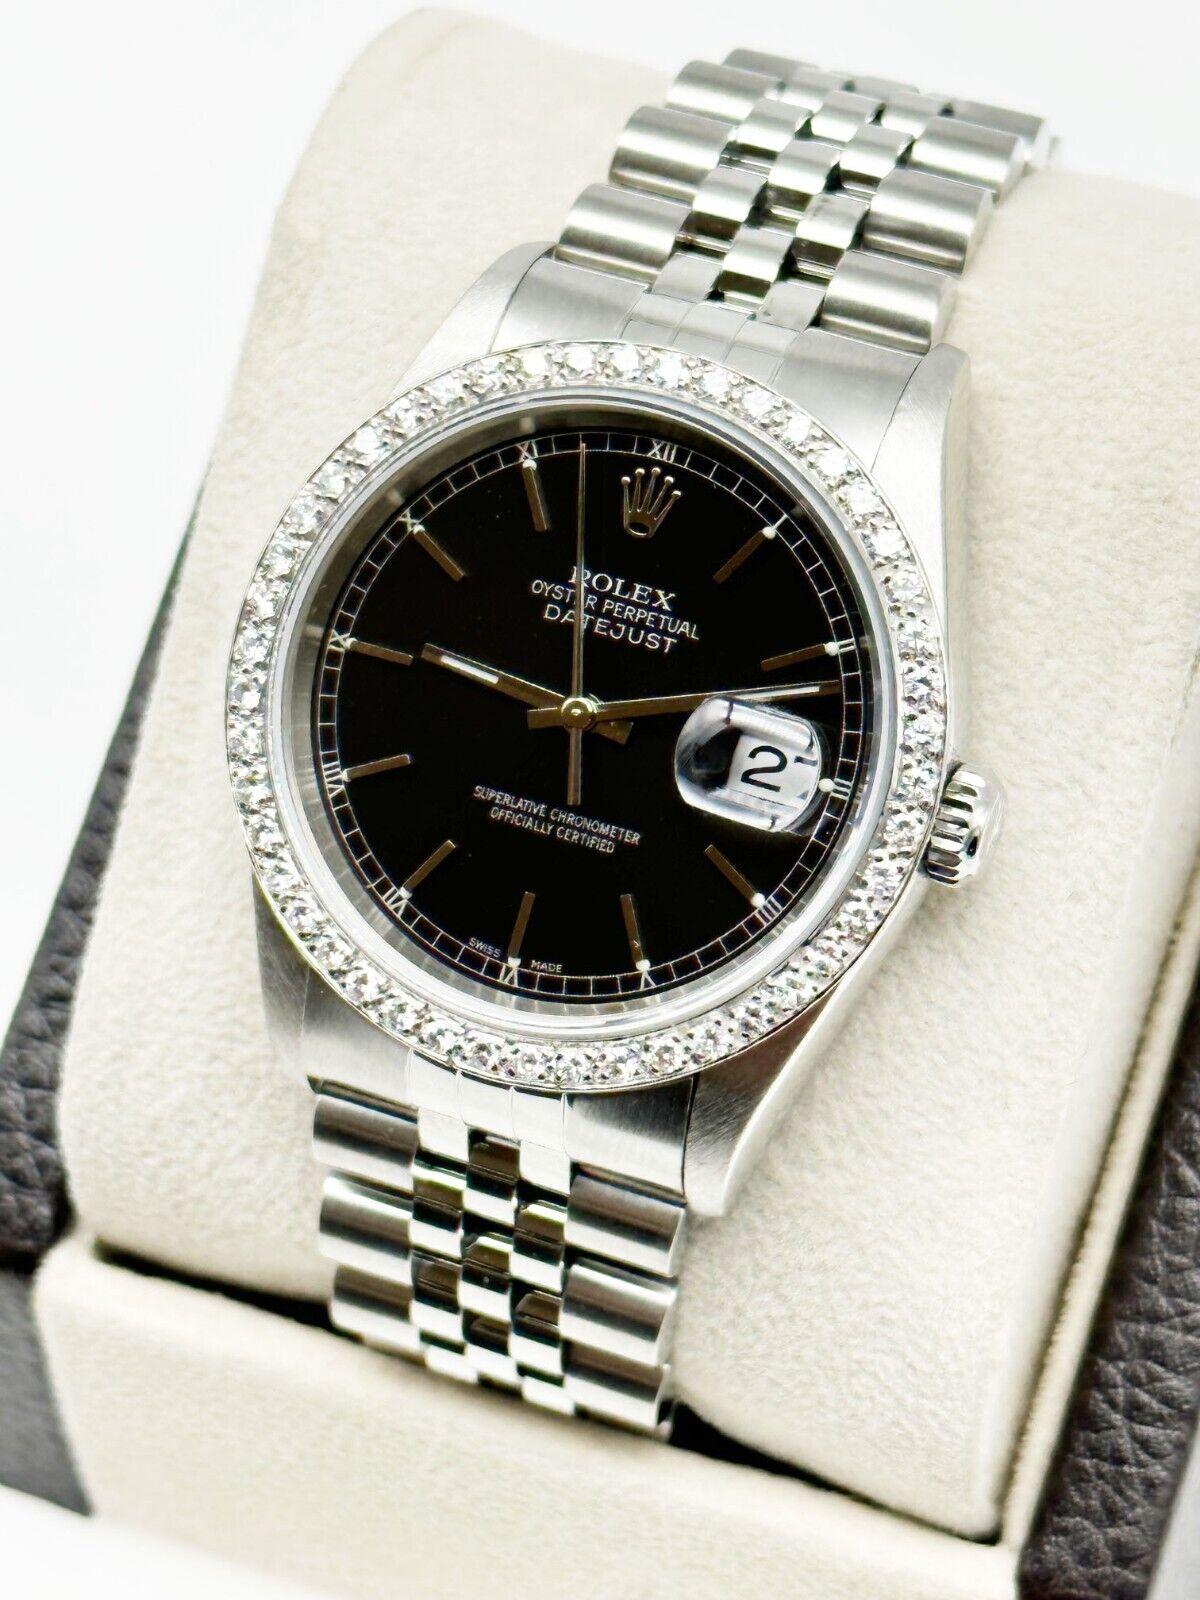 Style Number: 16264 

Serial: K962***

Year: 2001 

Model: Datejust  

Case Material: Stainless Steel  

Band: Stainless Steel  

Bezel: Custom Diamond Bezel  

Dial: Black 

Face: Sapphire Crystal 

Case Size: 36mm 

Includes: 

-Elegant Watch